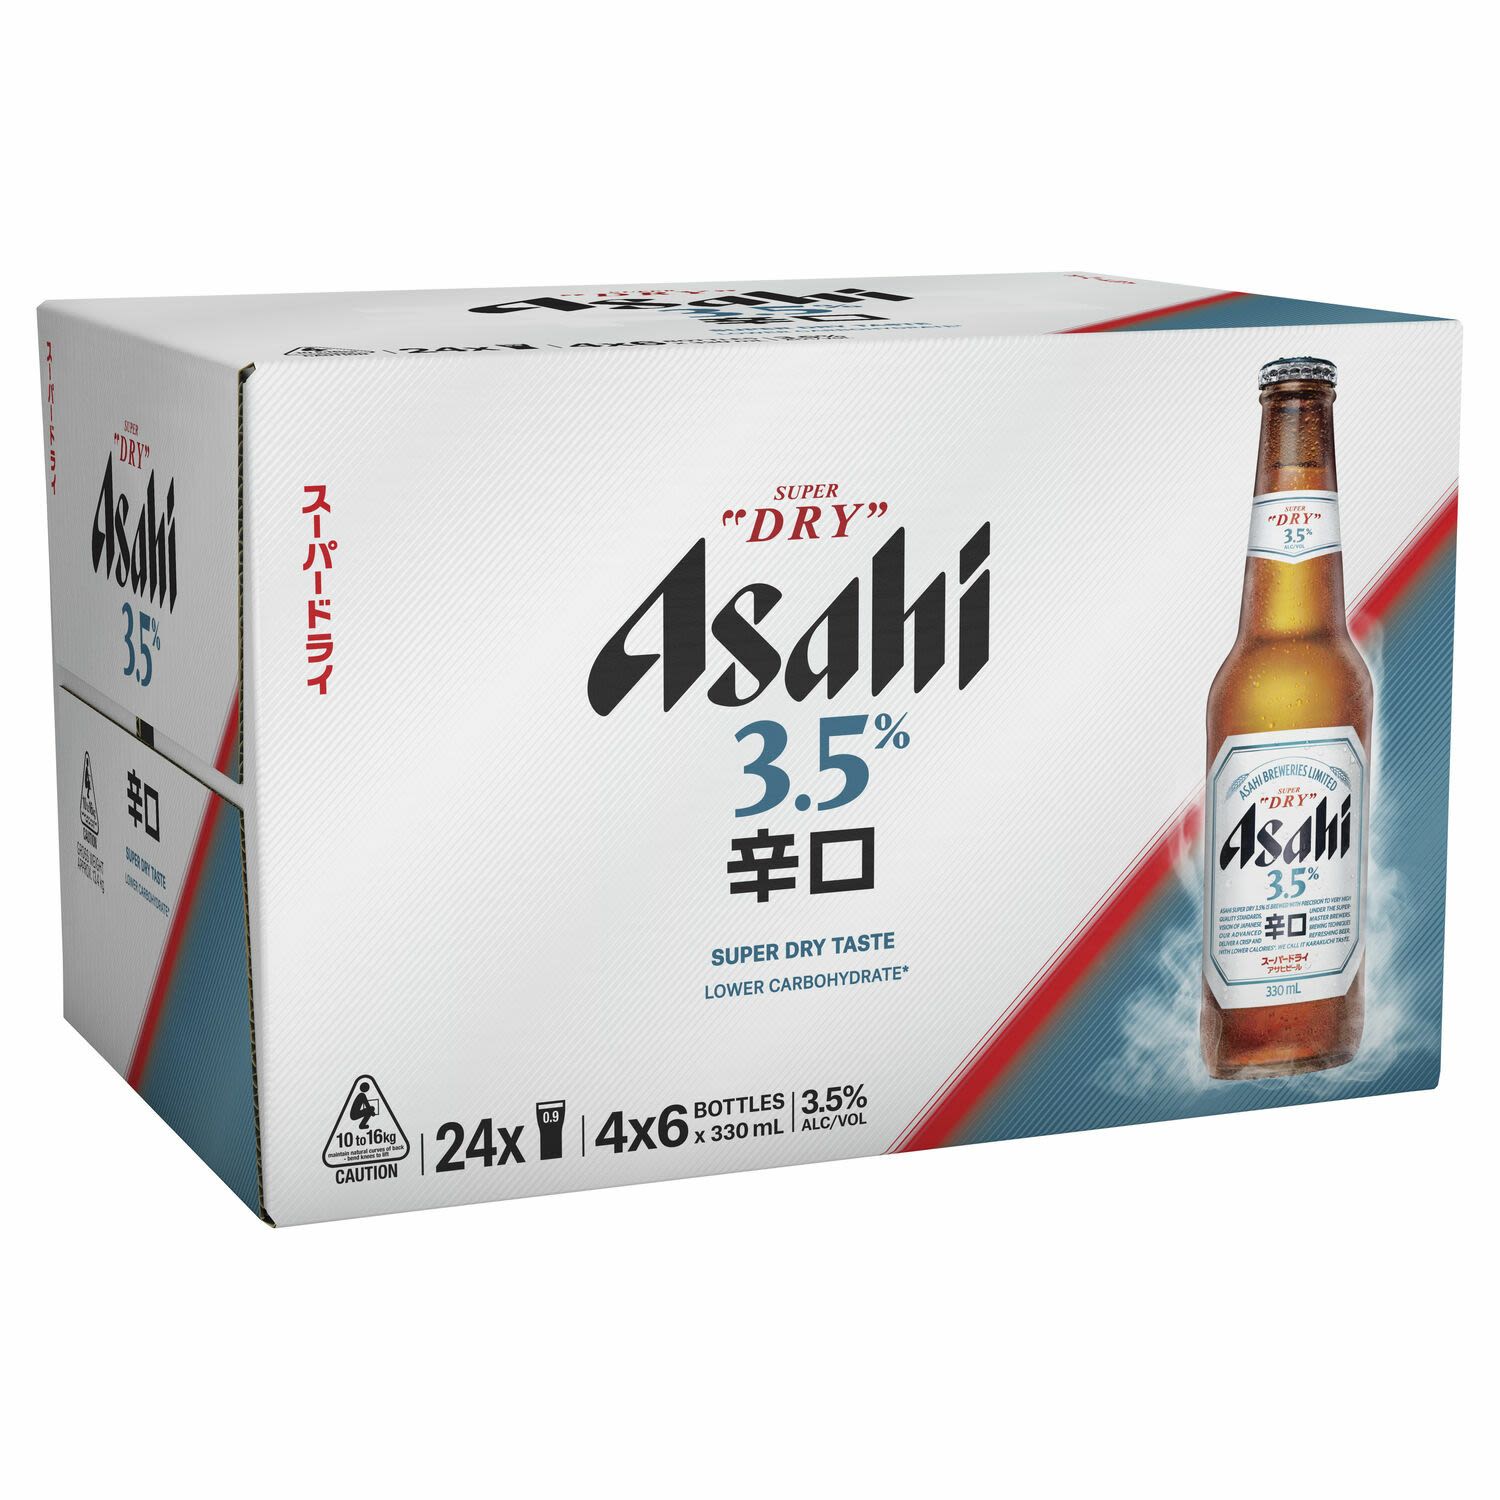 Asahi 'Soukai' (refreshing in Japanese), is a low-carb, premium international mid-strength beer, brewed using the same unique, quality Asahi yeast. At 3.5%, Soukai has a crisp and refreshing taste, with a slight bitter note to provide a balanced flavour.<br /> <br />Alcohol Volume: 3.50%<br /><br />Pack Format: 24 Pack<br /><br />Standard Drinks: 0.9</br /><br />Pack Type: Bottle<br /><br />Country of Origin: Japan<br />